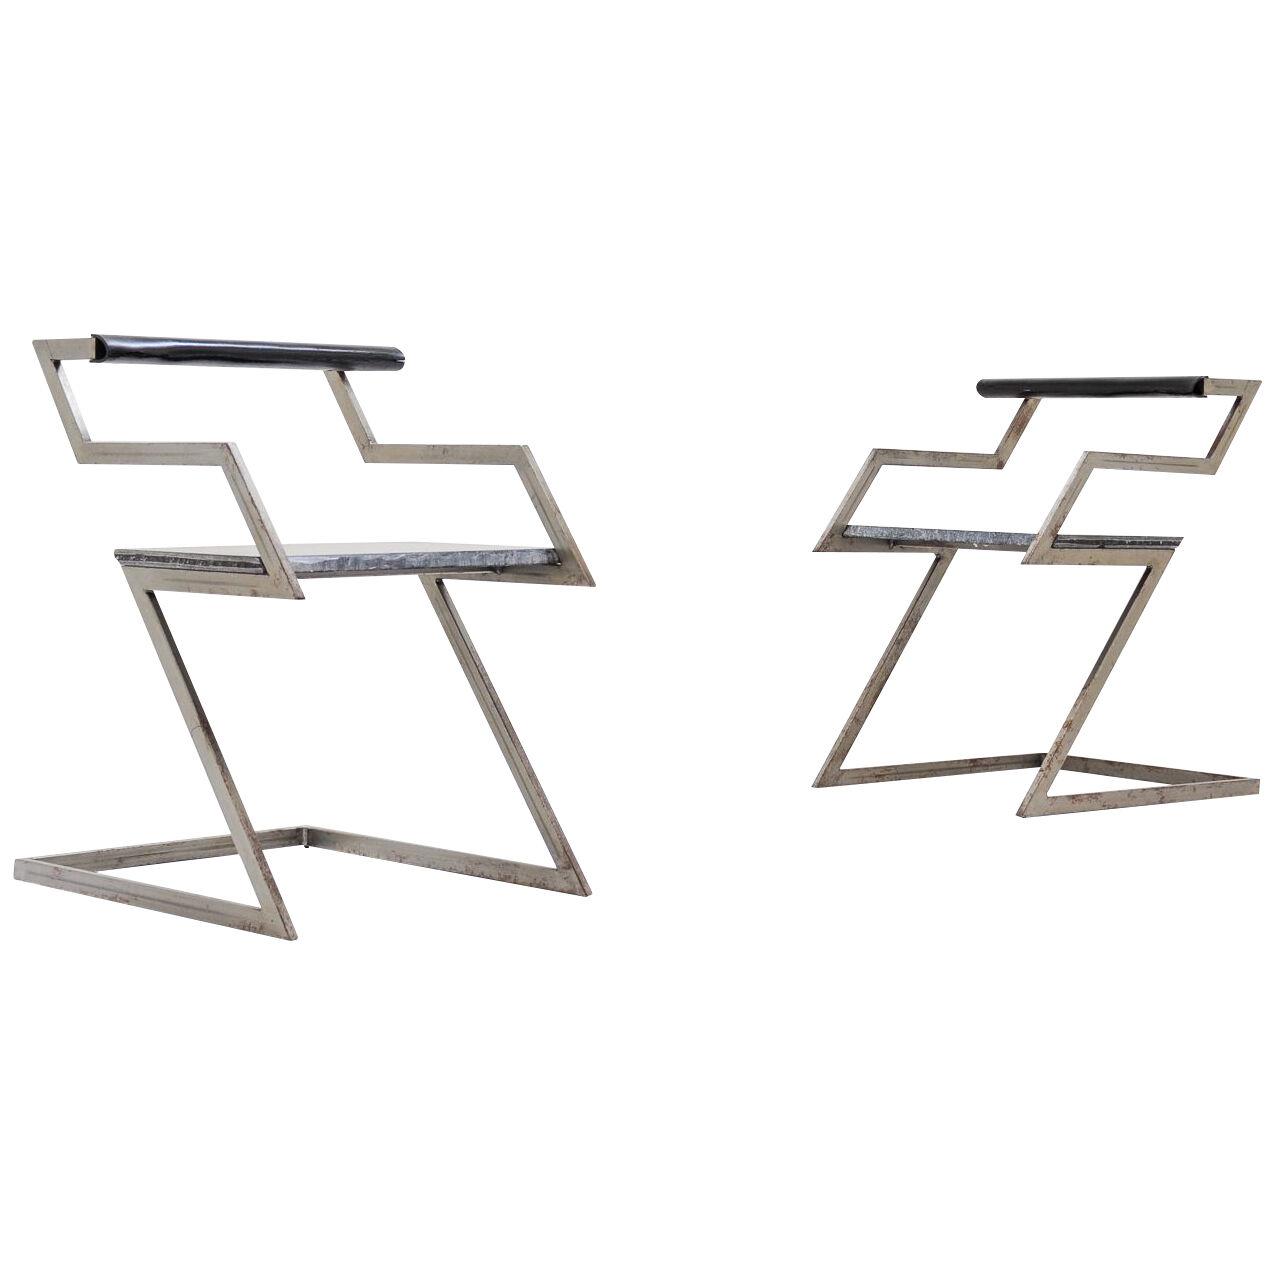 1983 Pair of Zig Zag Chairs by Gerard Kuijpers